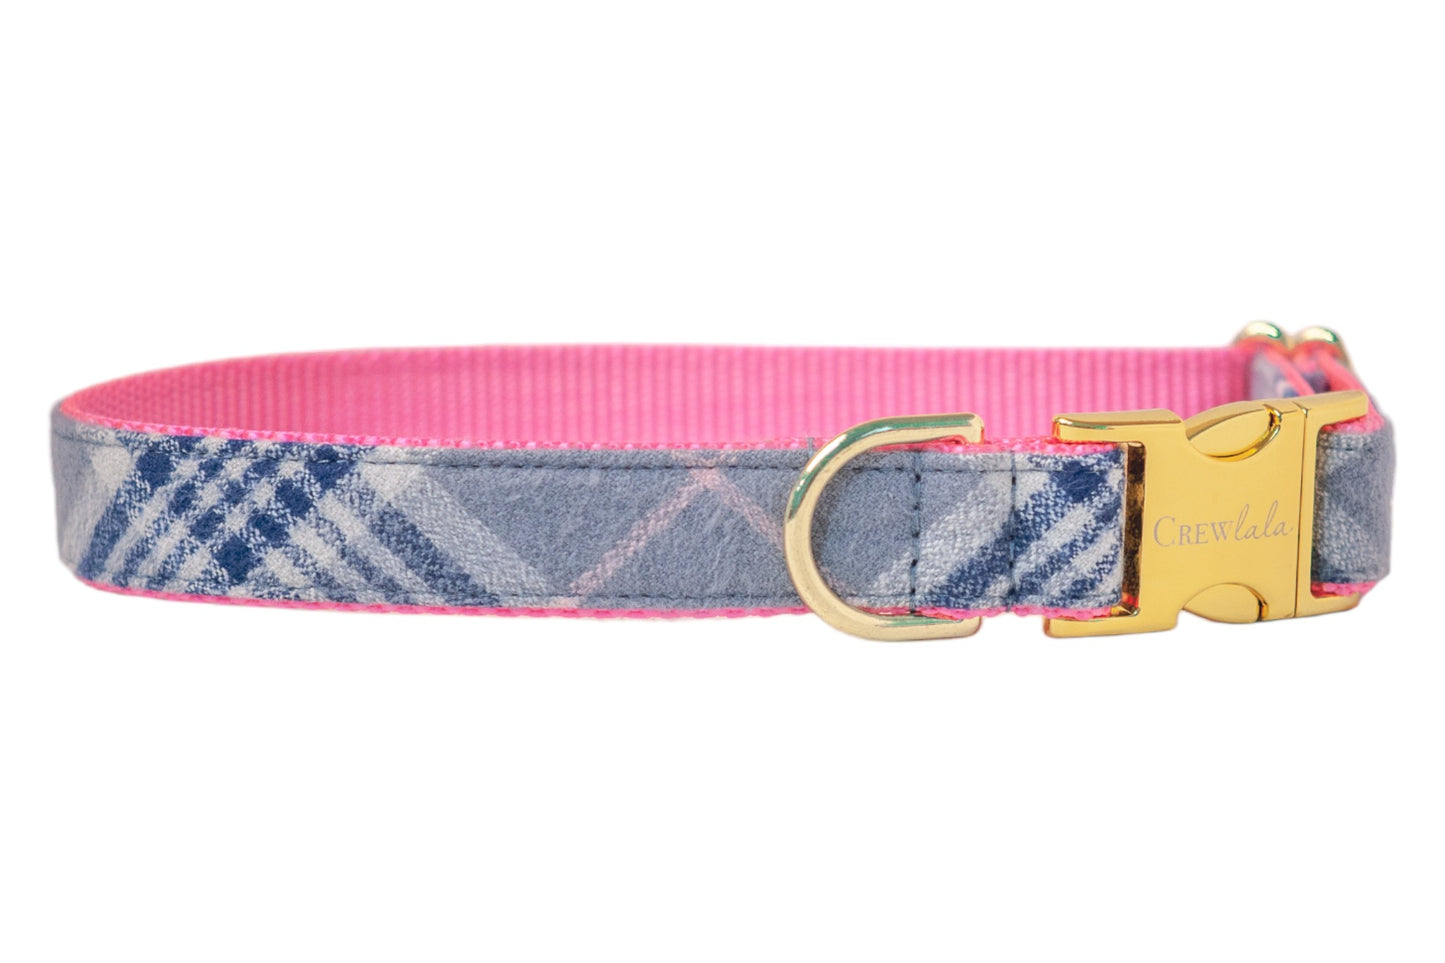 Morning Mist Flannel Dog Collar - Two Styles! - Crew LaLa